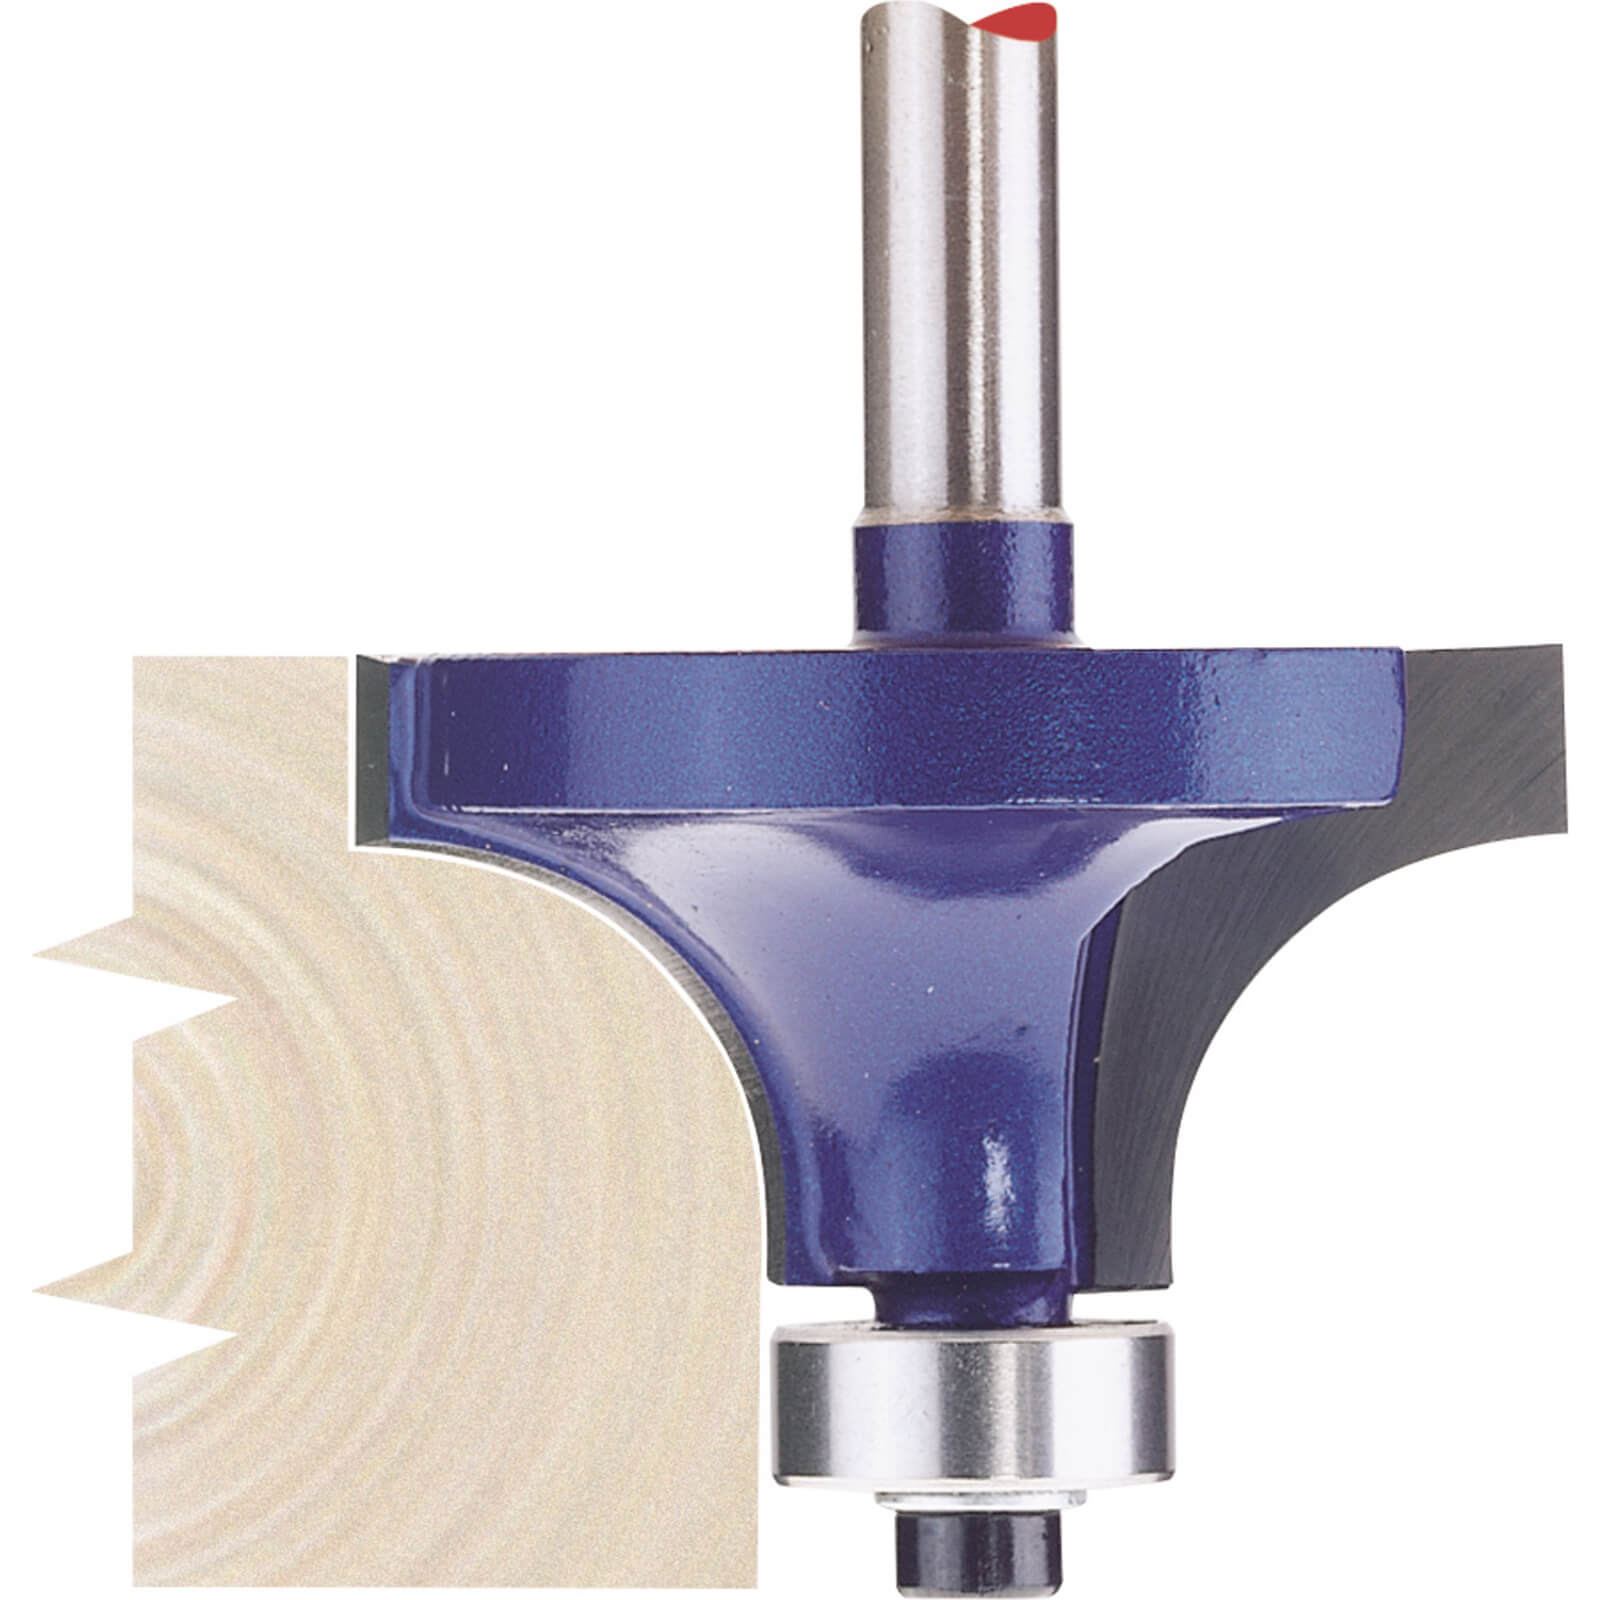 Image of Draper Bearing Guided Rounding Over Router Cutter 38mm 14mm 1/4"